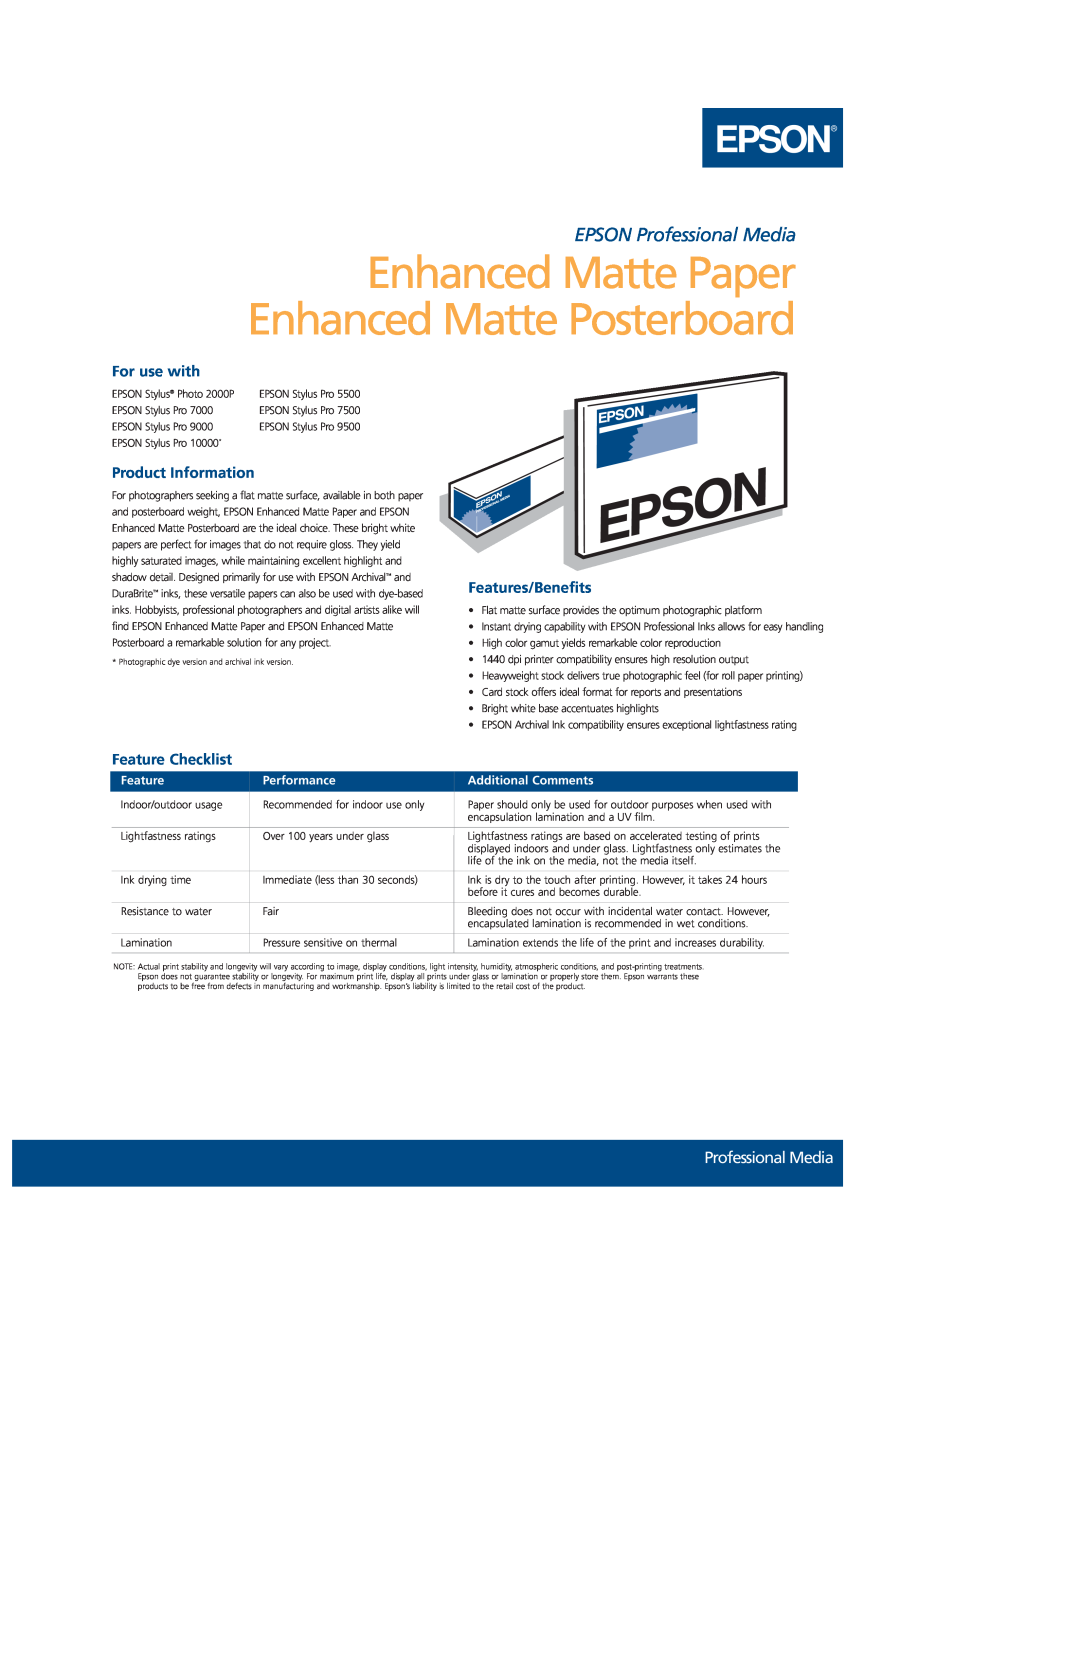 Epson S041603 manual Enhanced Matte Paper Enhanced Matte Posterboard, Epson, EPSON Professional Media, For use with 